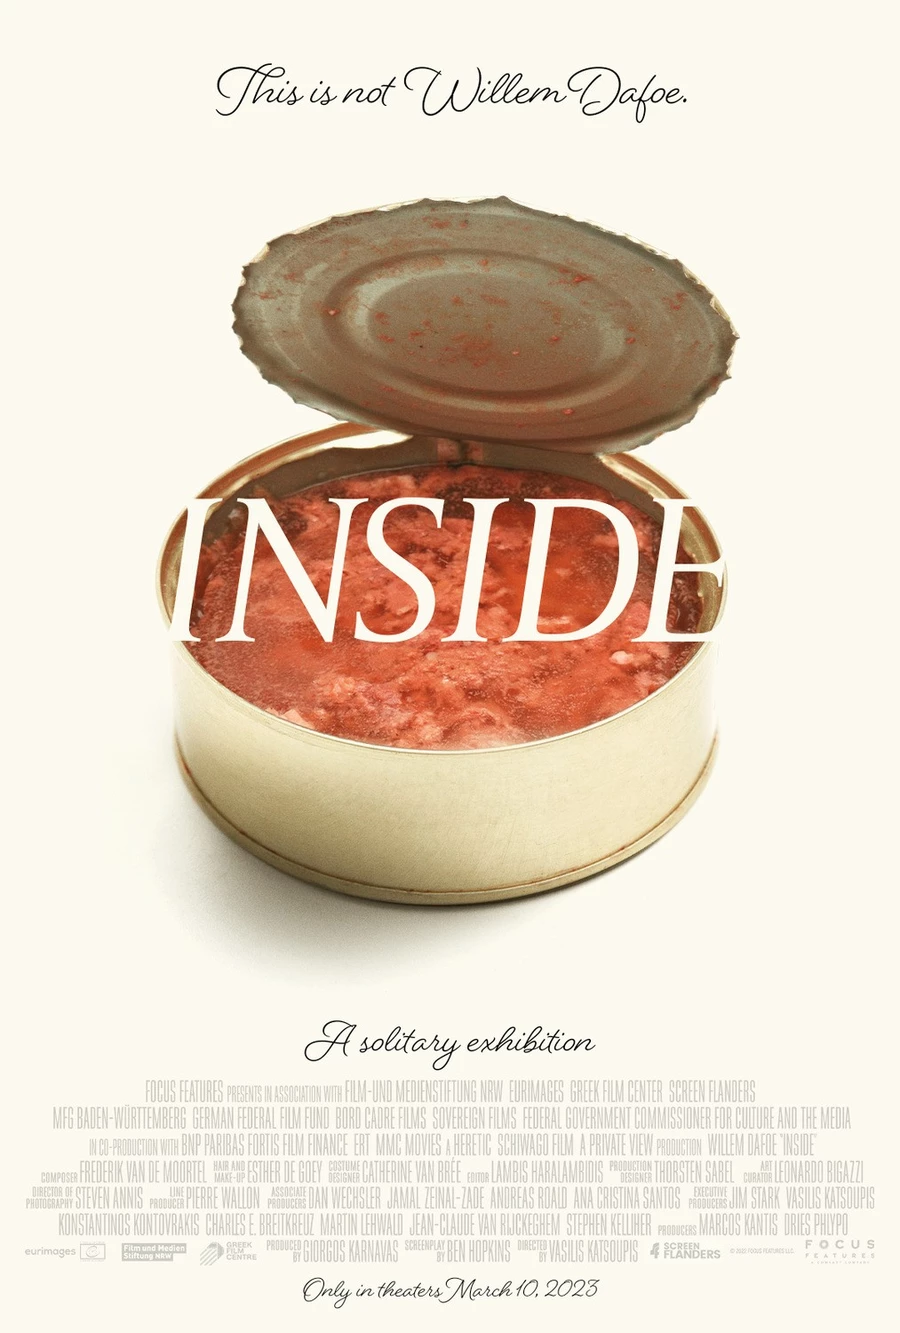 In case you don't know who Willem Dafoe is, the funny posters for the movie «Inside» hasten to inform you that he is not a canned, gay or spoiled orange. "Inside" tells the story of Nemo, an art thief who becomes a hostage in a New York penthouse after a robbery goes awry. Locked in an apartment with nothing but priceless works of art, he must use all his cunning and ingenuity to survive. 